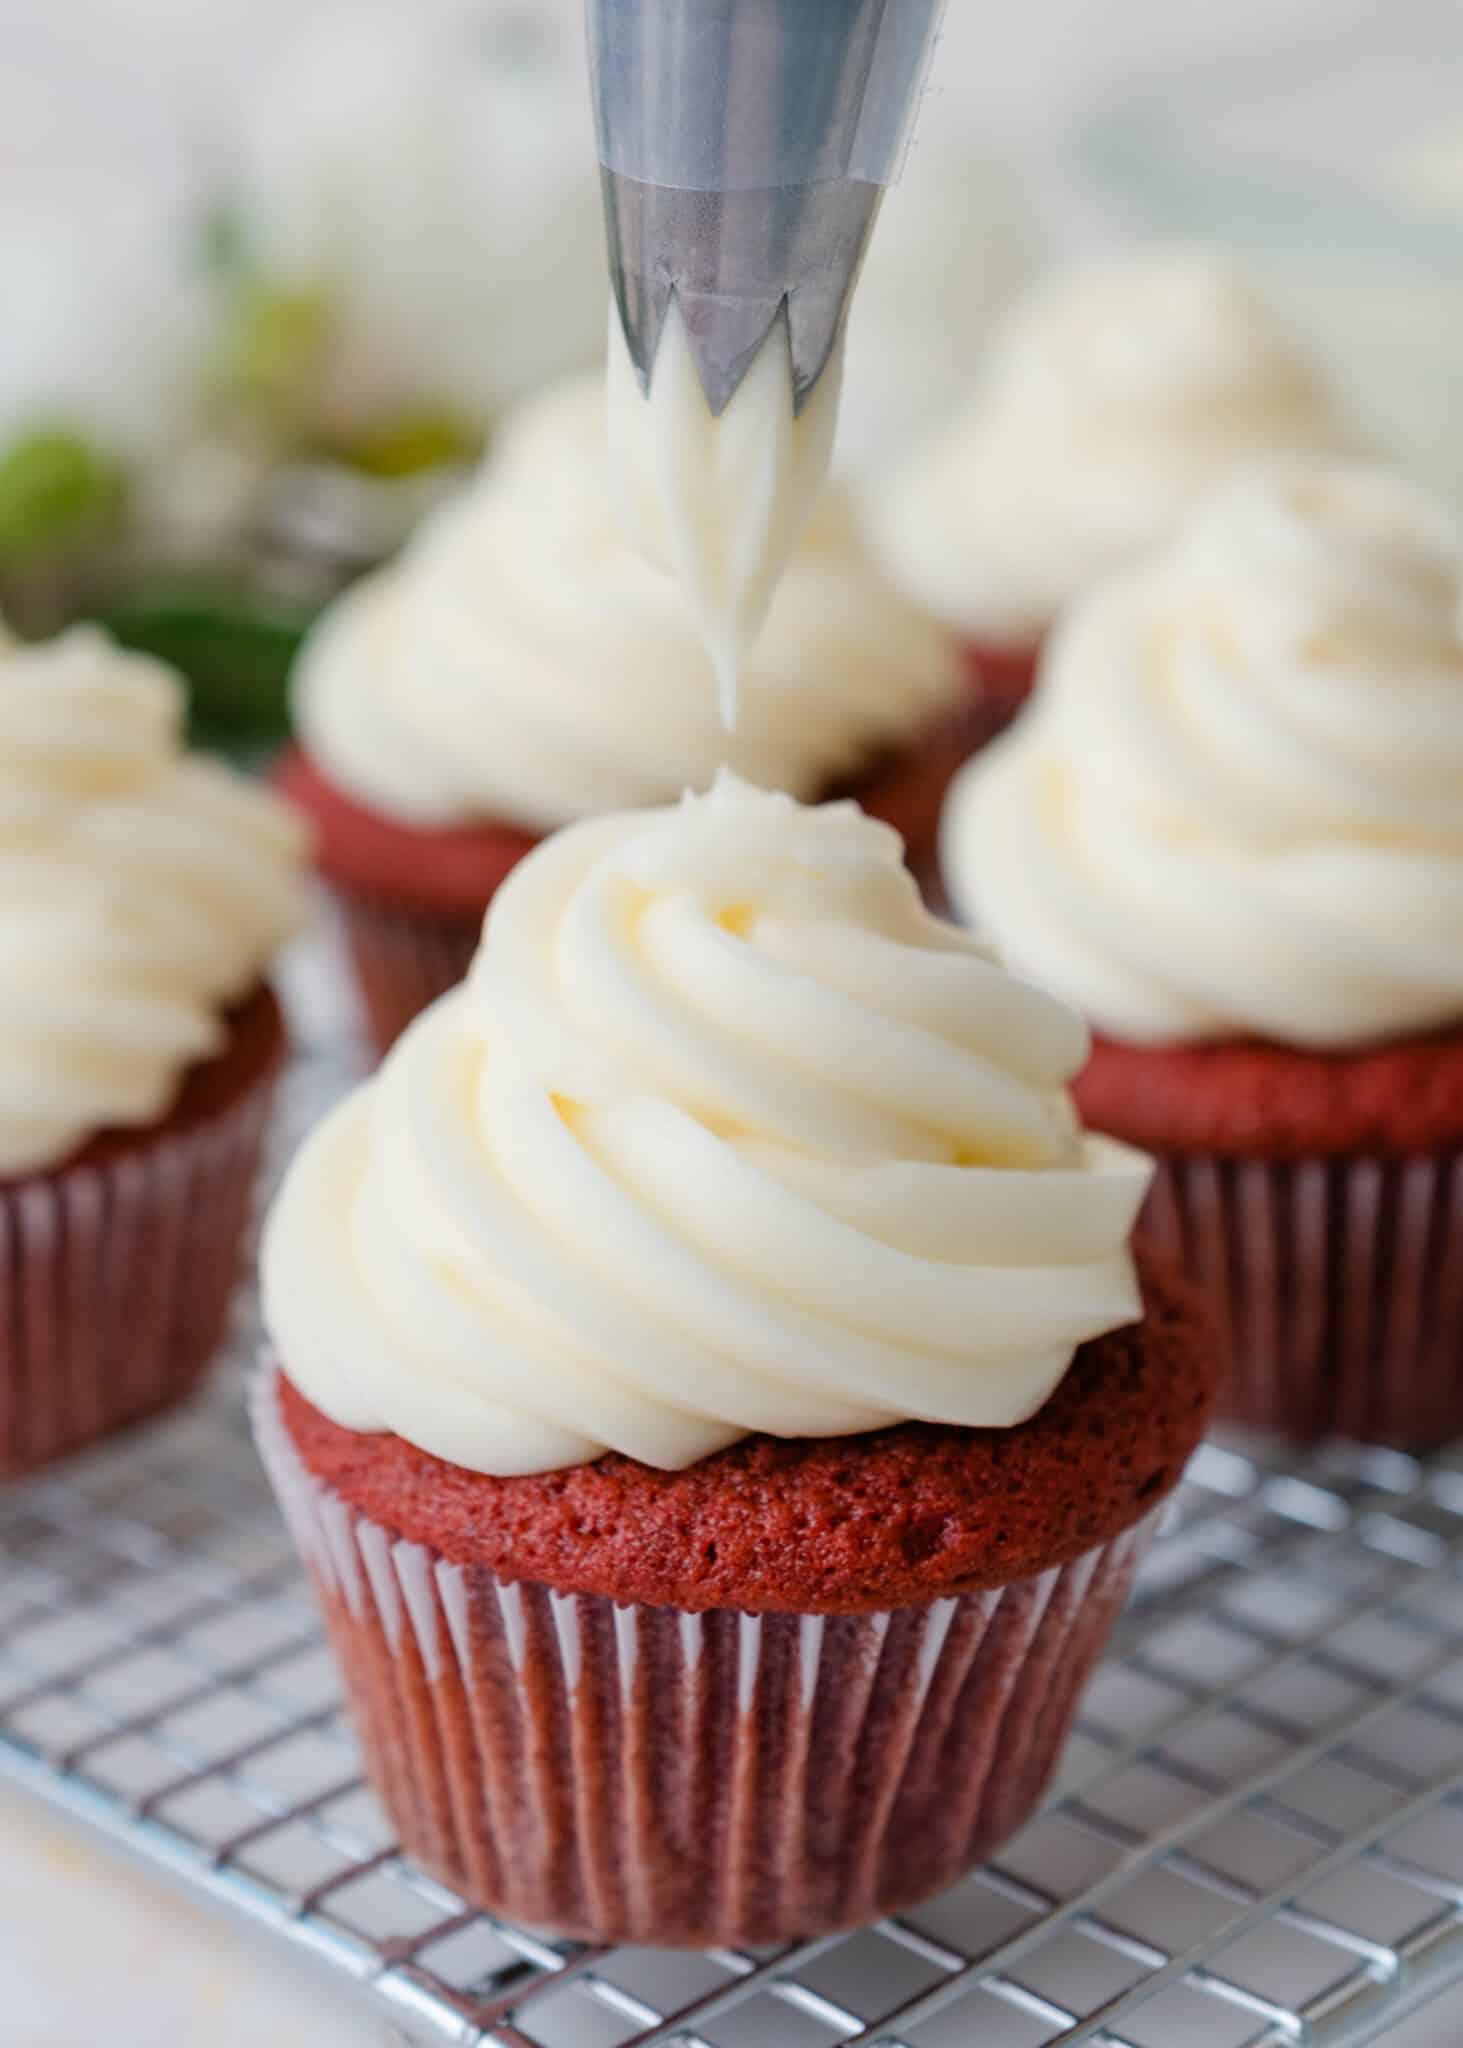 piping tip held above a red velvet cupcake